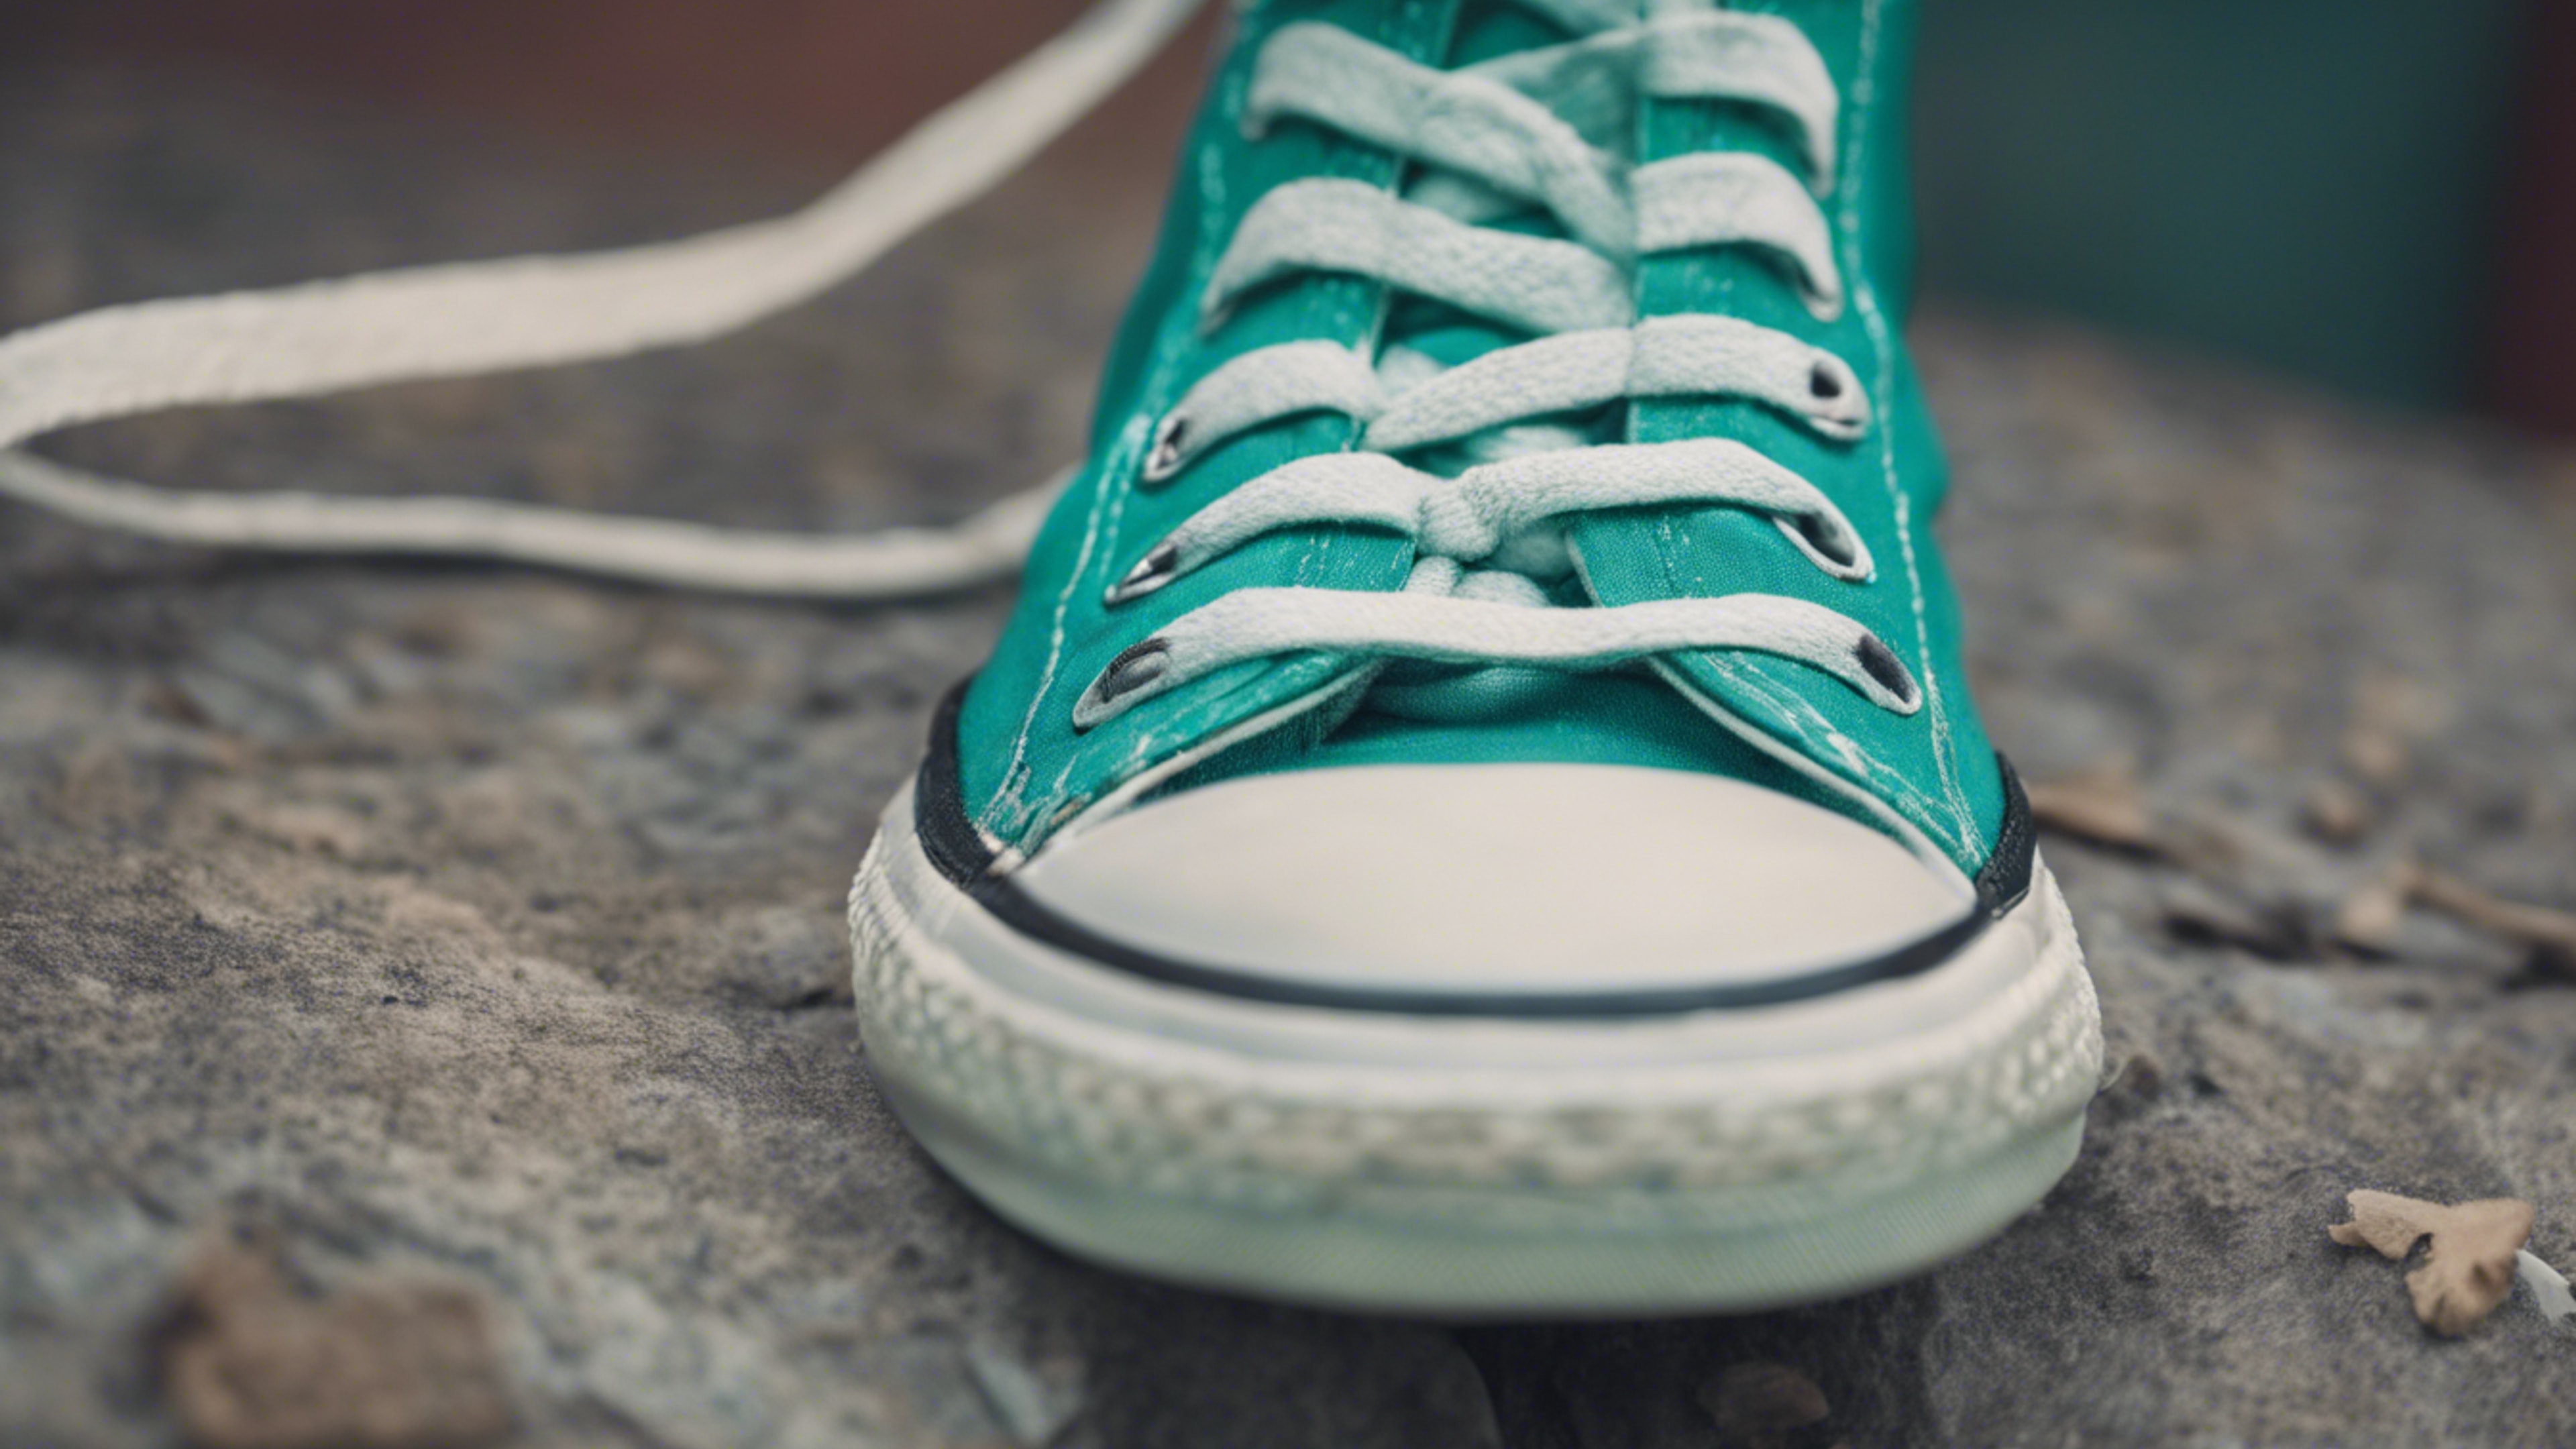 A close-up of a pair of cool teal colored Converse sneakers. Kertas dinding[fe0f07076e3947159bbd]